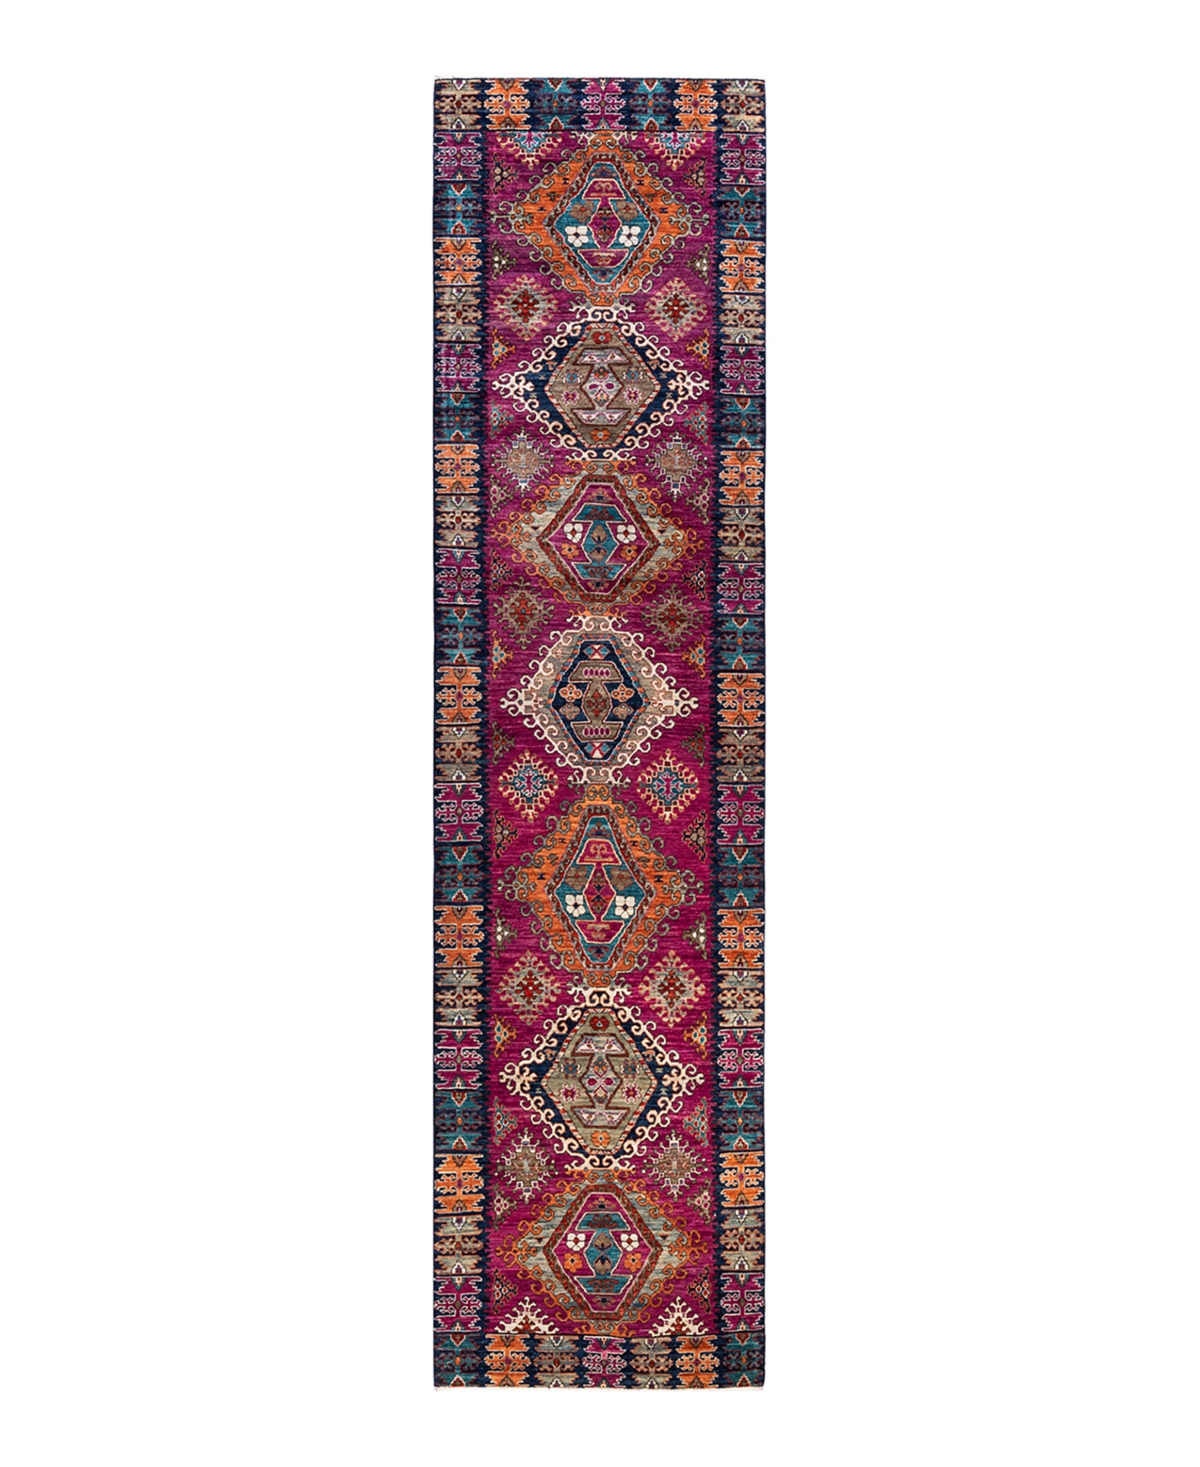 Adorn Hand Woven Rugs Serapi M1973 3'4in x 13'10in Runner Area Rug - Purple